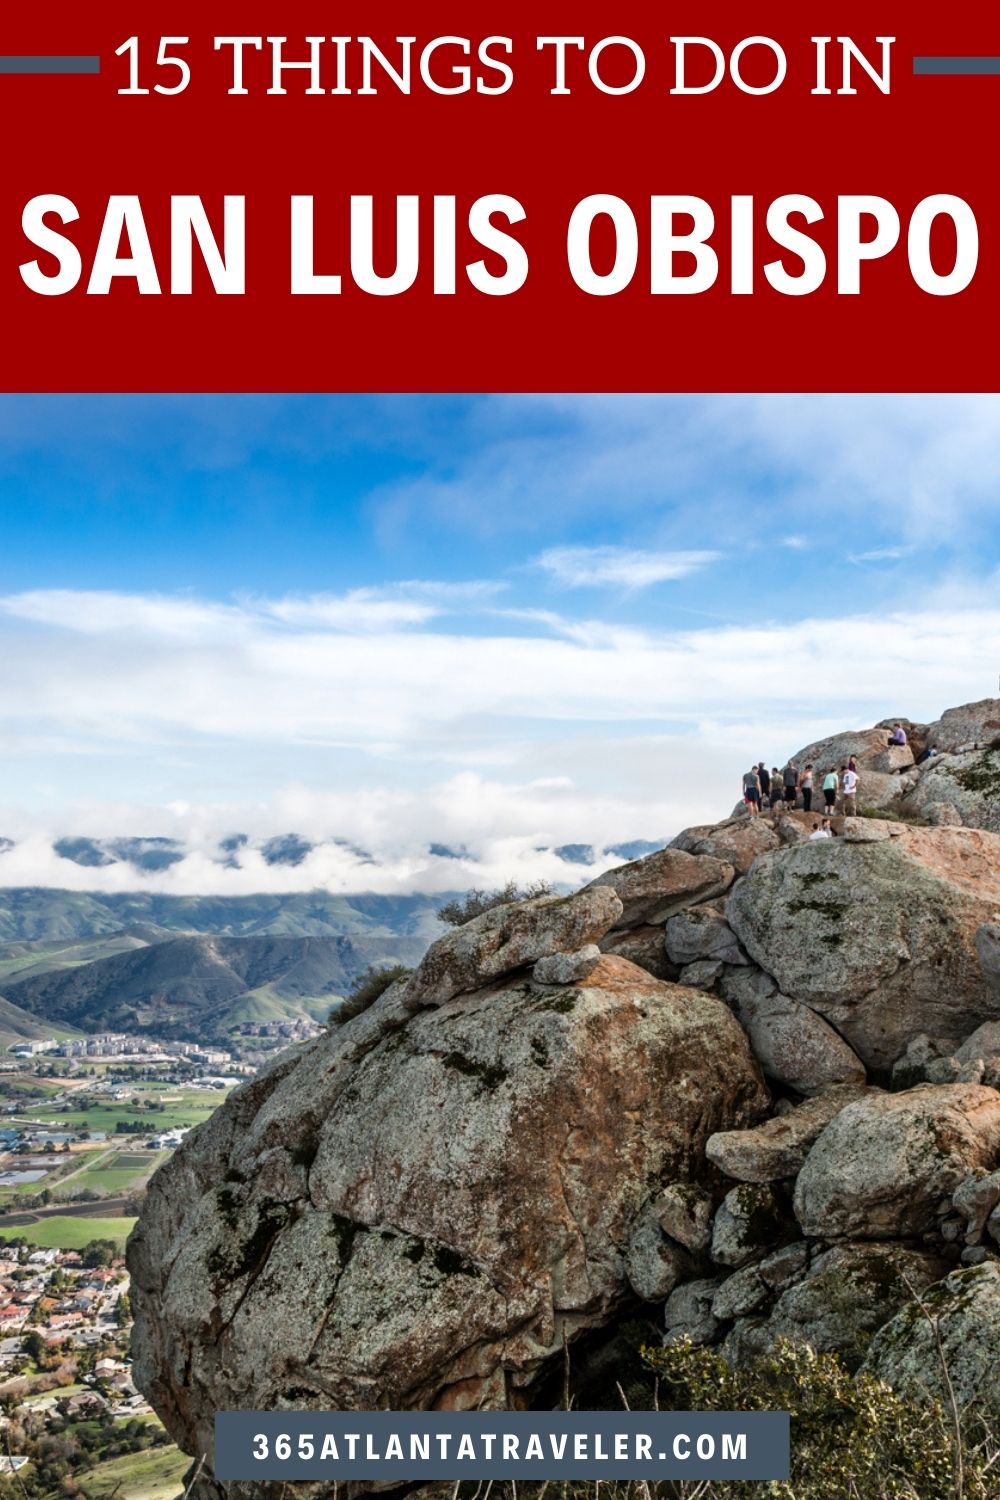 15 OUTSTANDING THINGS TO DO IN SAN LUIS OBISPO